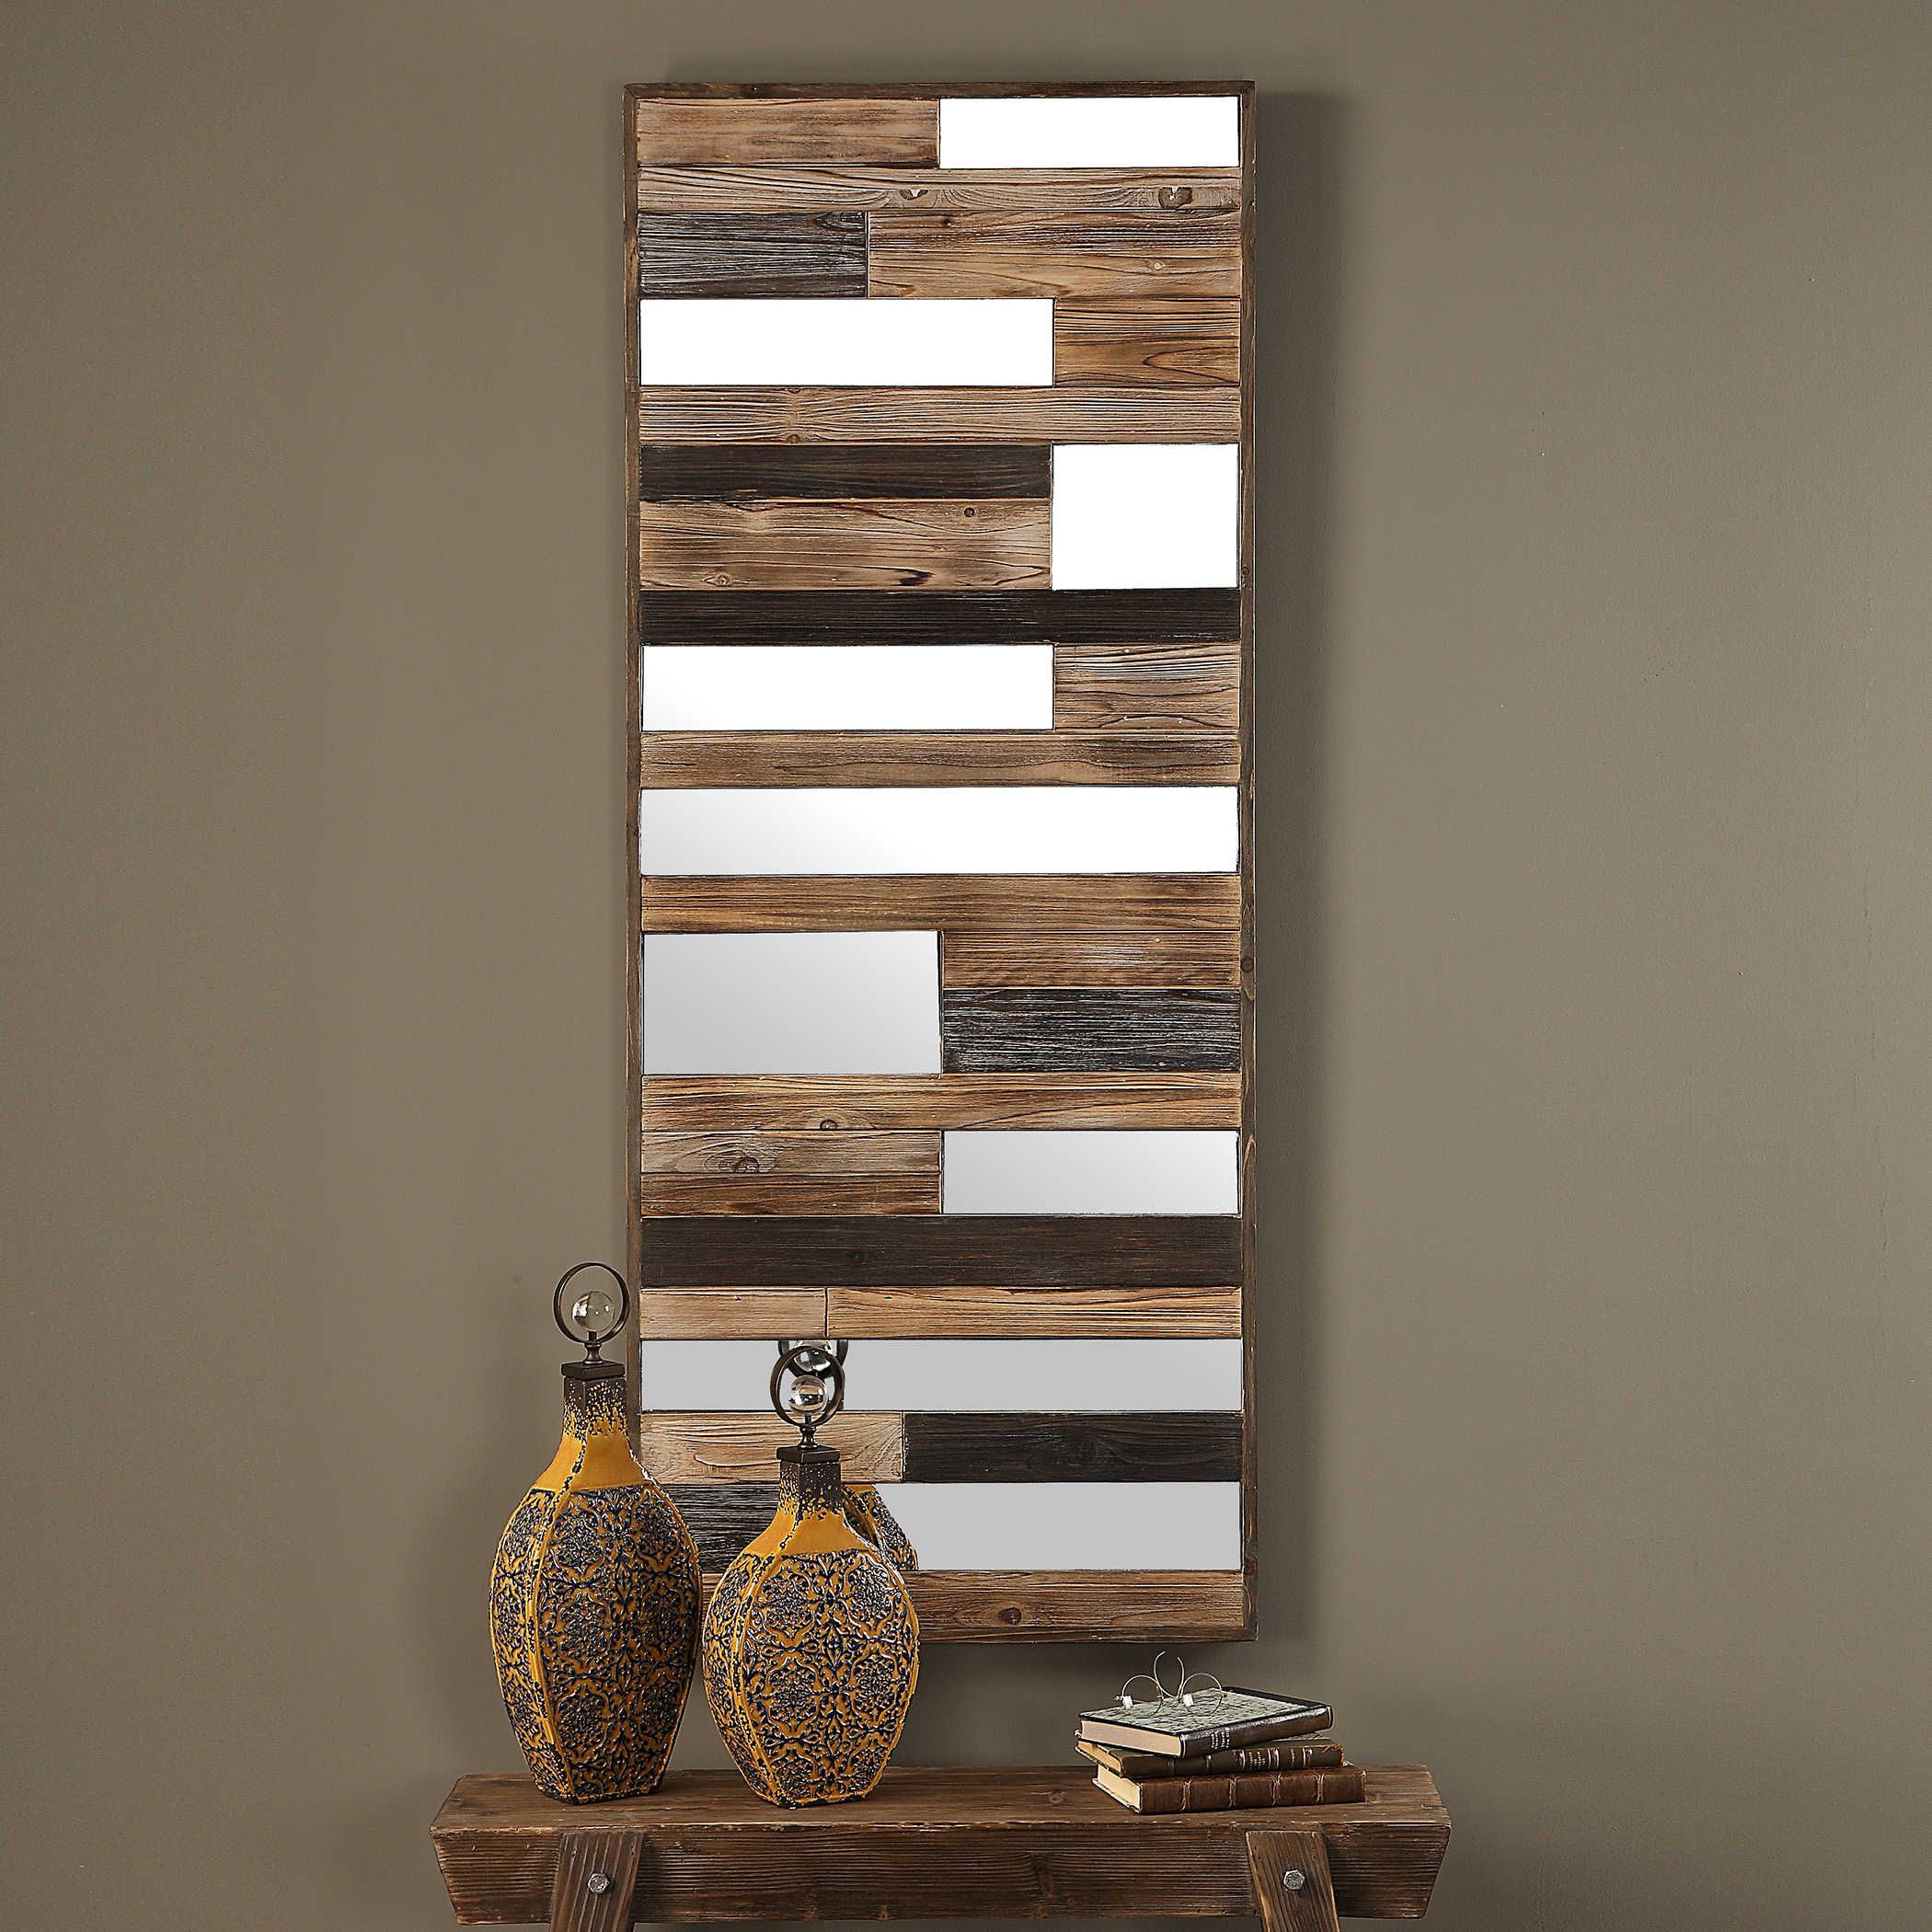 Kaine Wood Wall Decor | Uttermost Within Newest Hexagons Wood Wall Art (View 12 of 20)